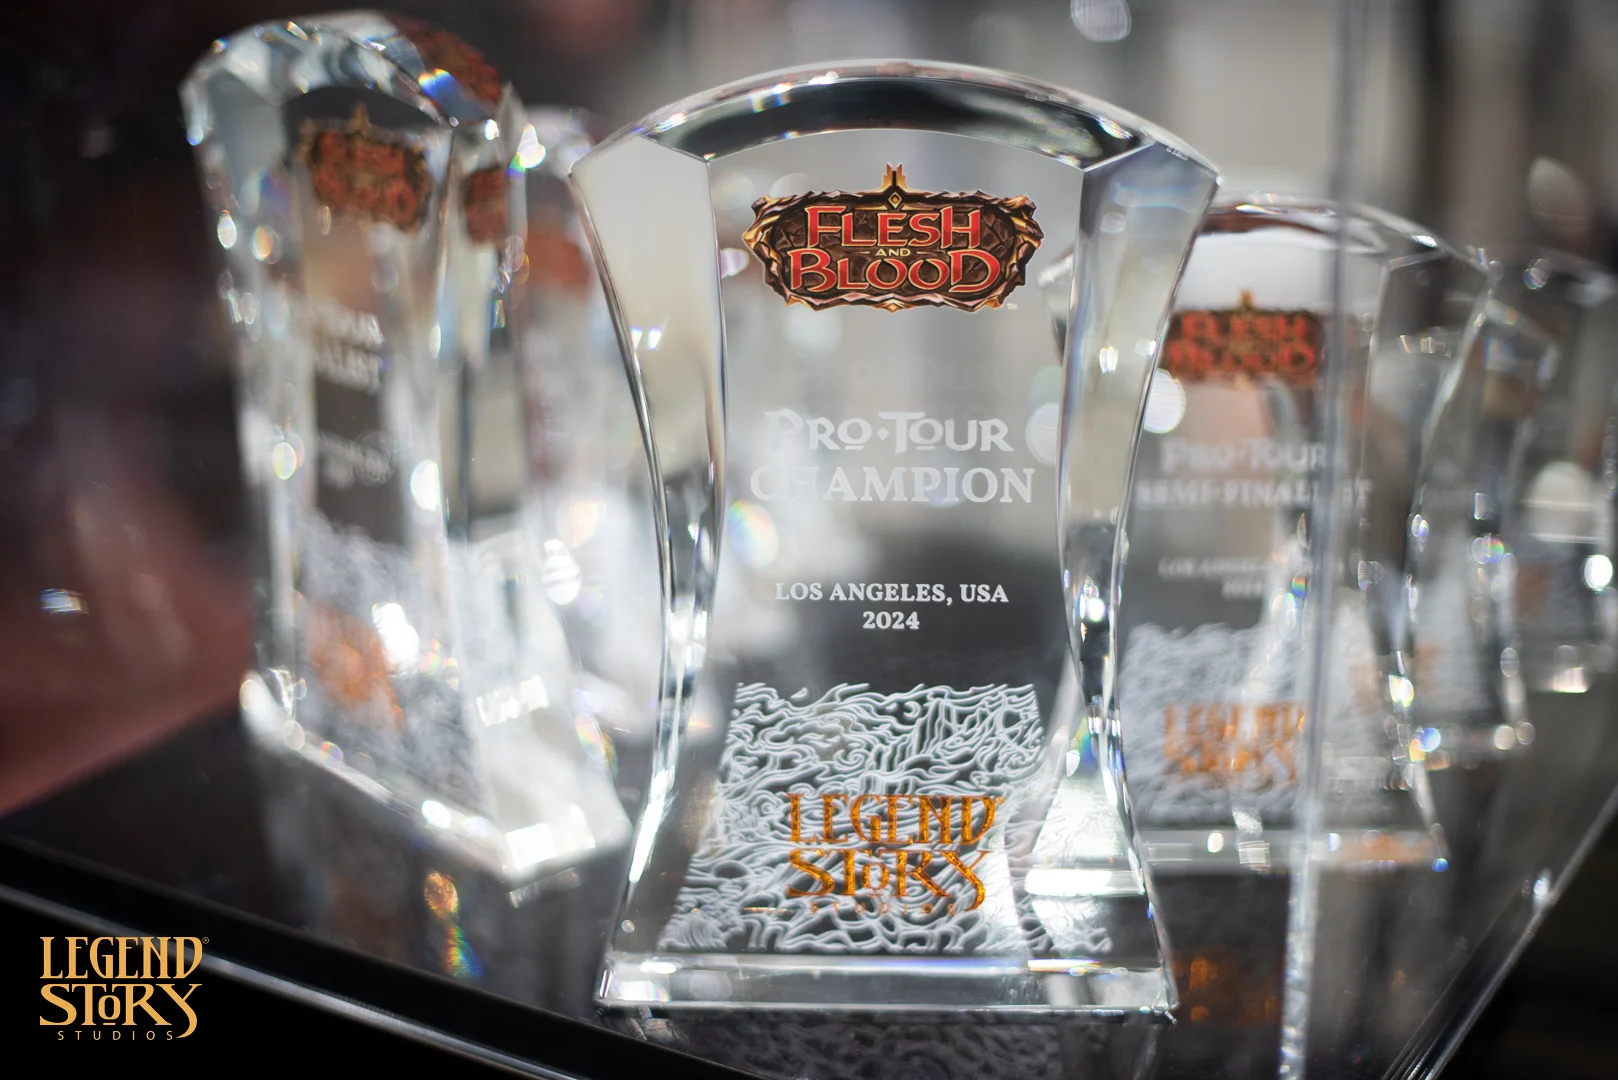 Pro Tour - Day 1 - The Trophy